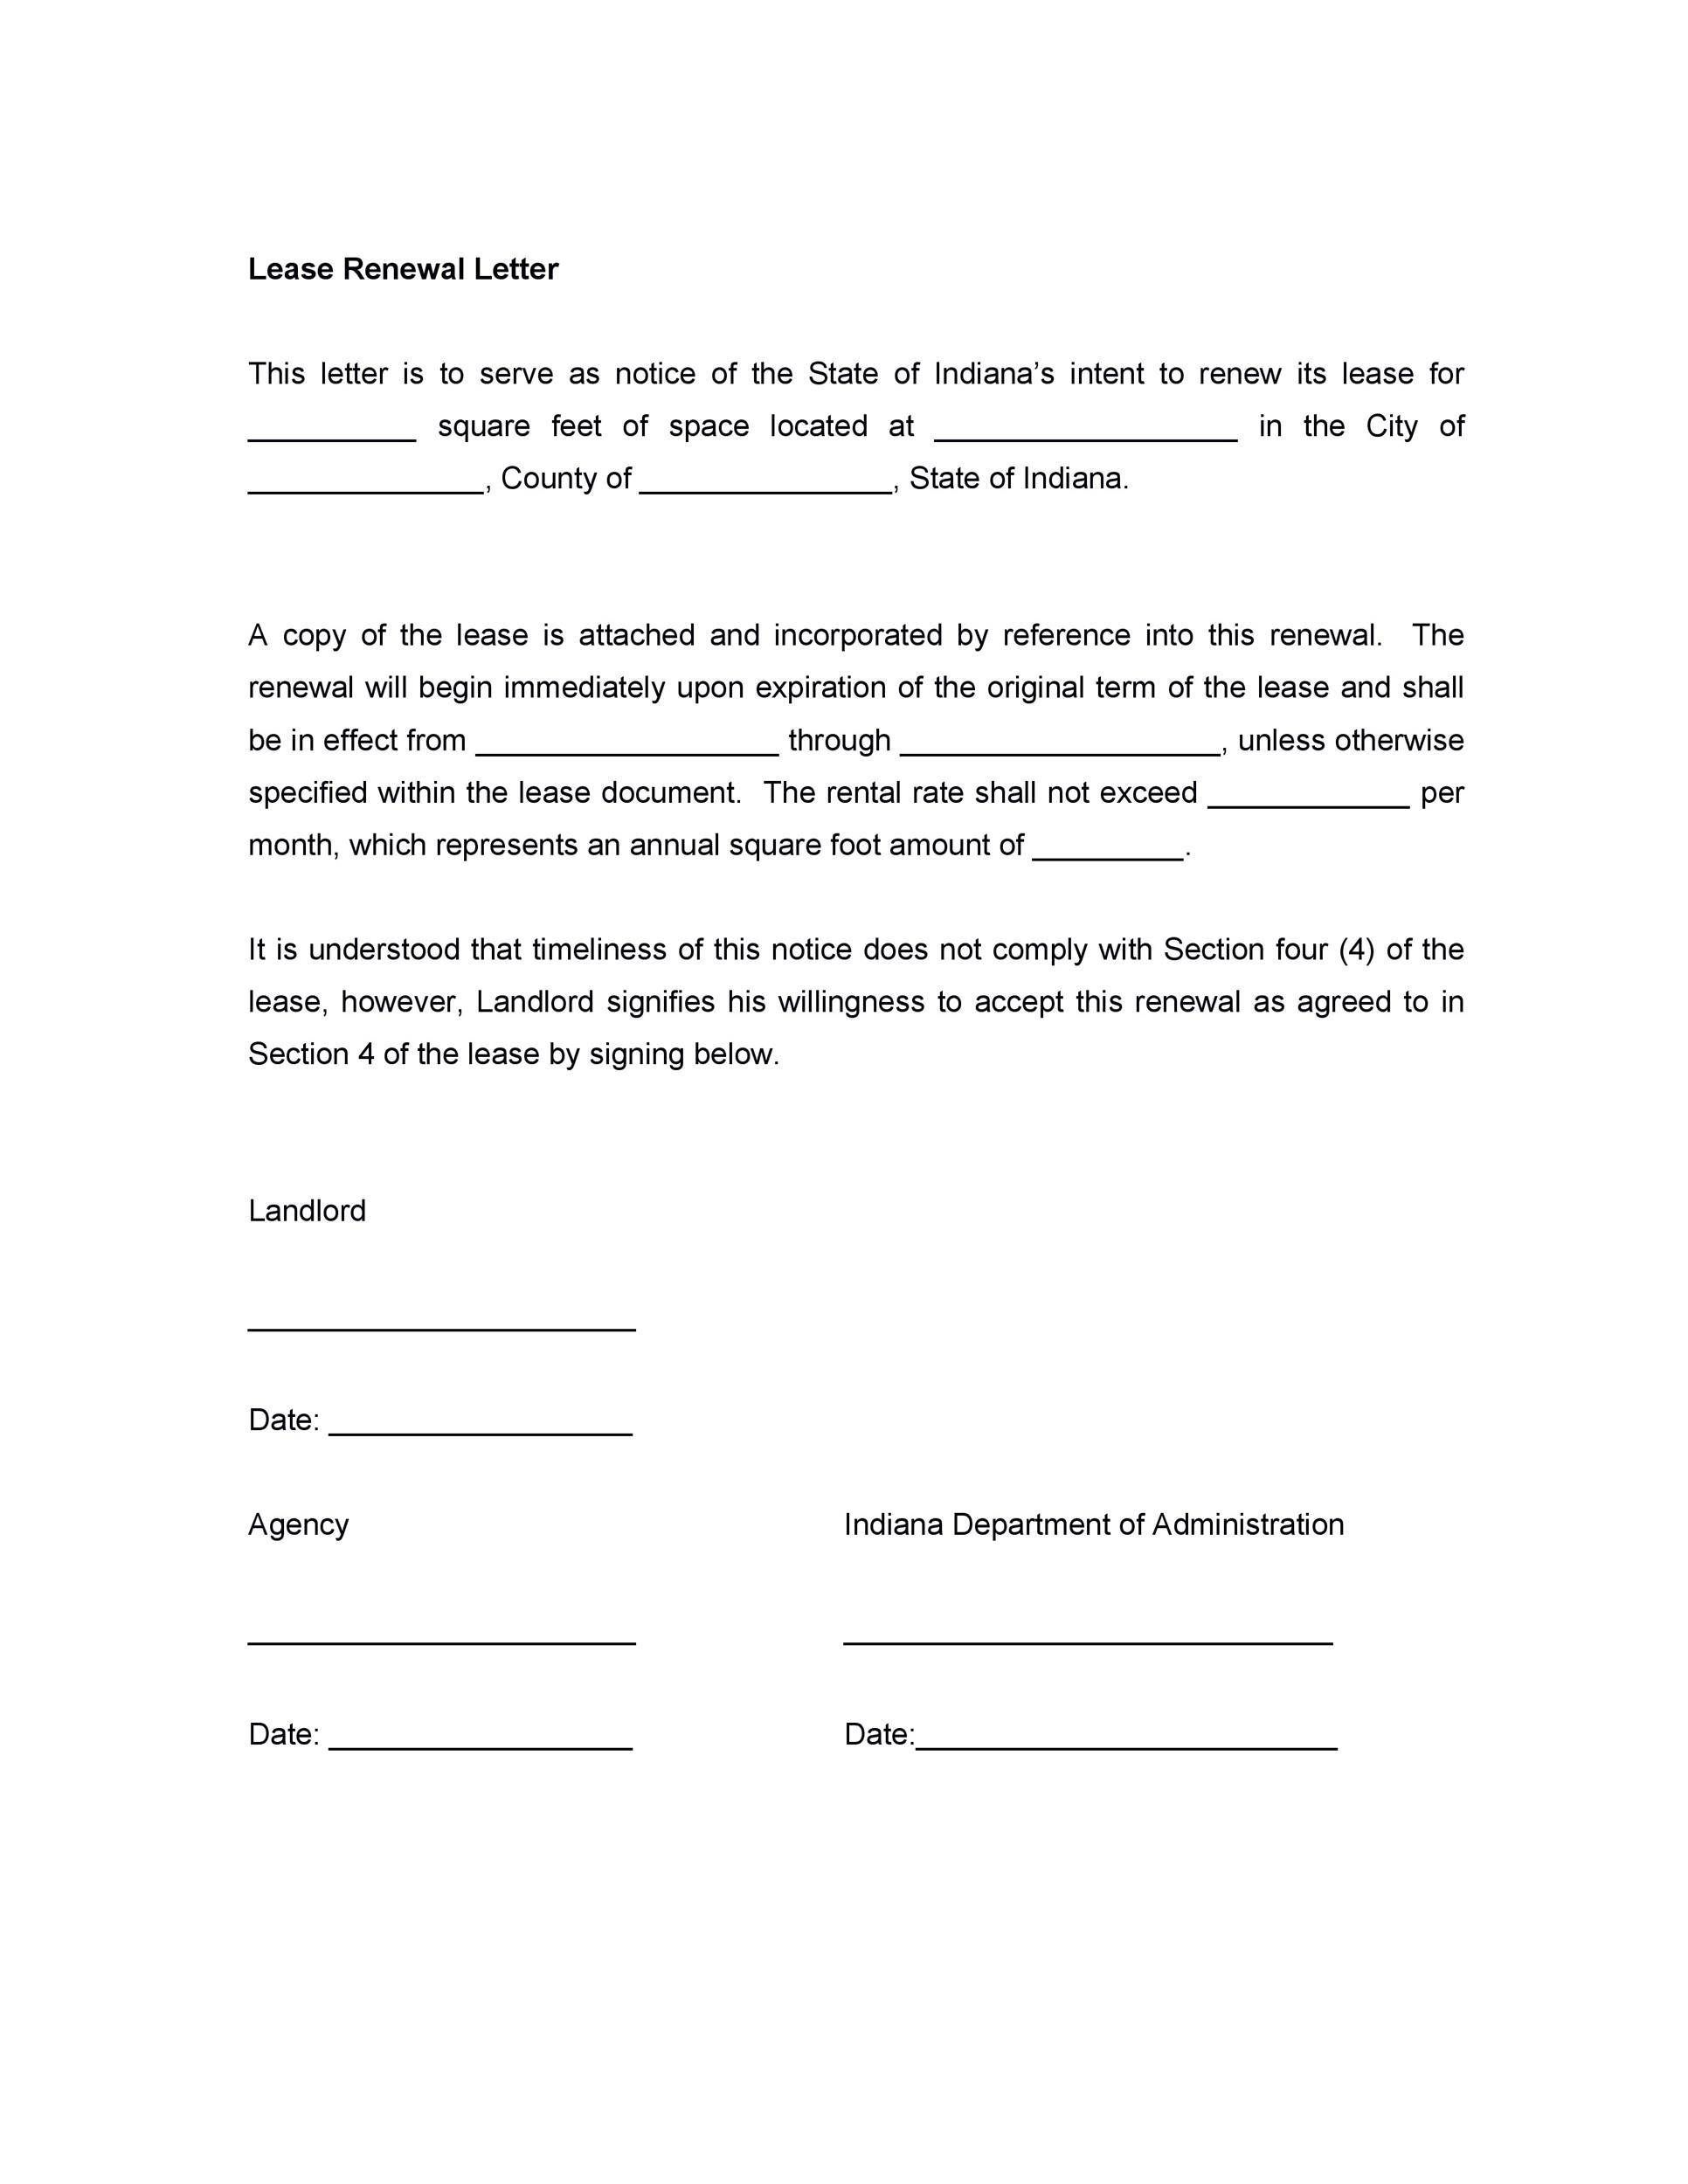 Sample Letter Of Intent To Lease Property from templatelab.com